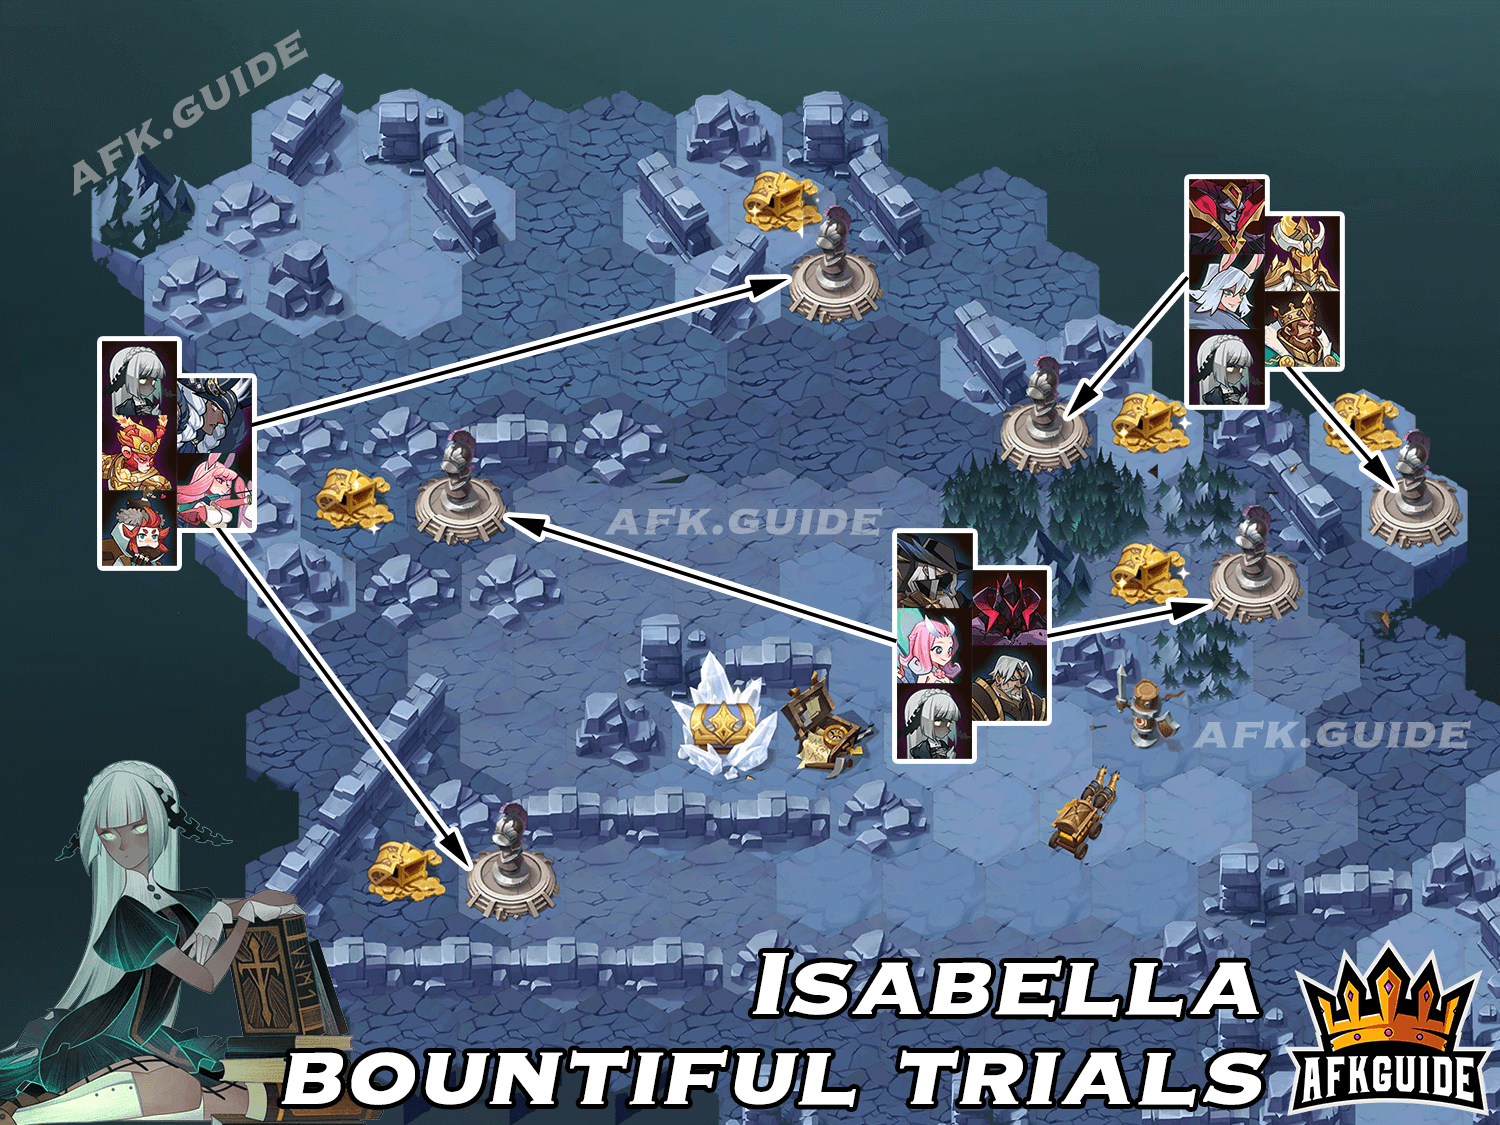 isabella bountiful trial guide